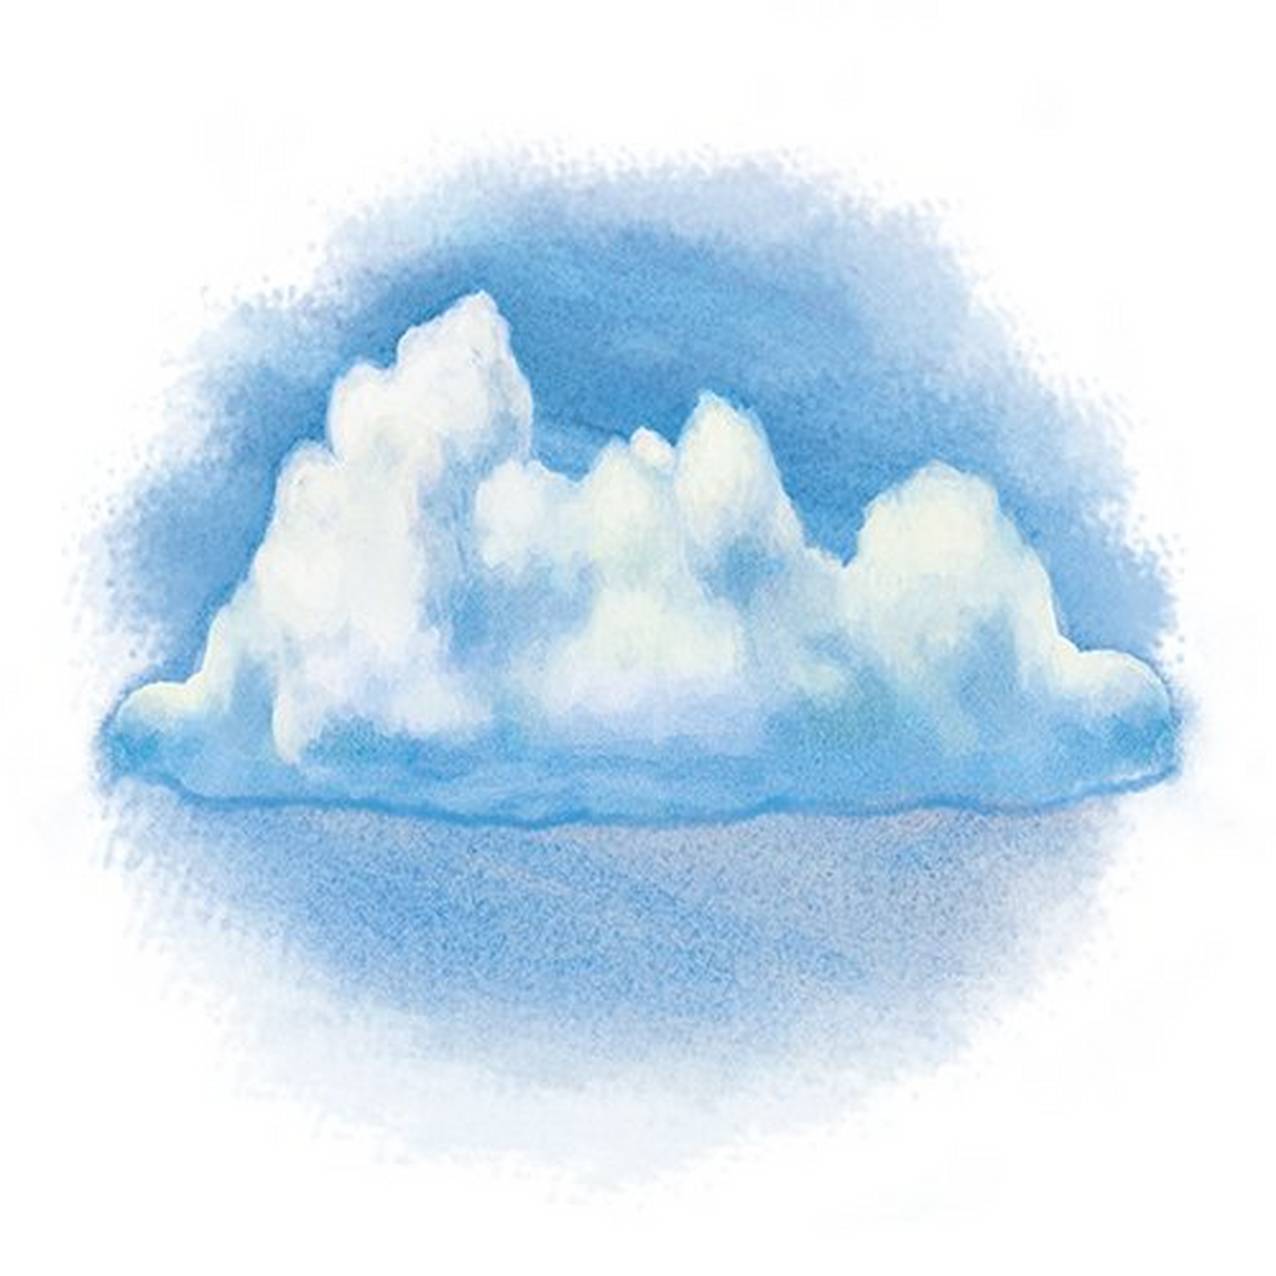 Illustration of a cloud in a blue sky